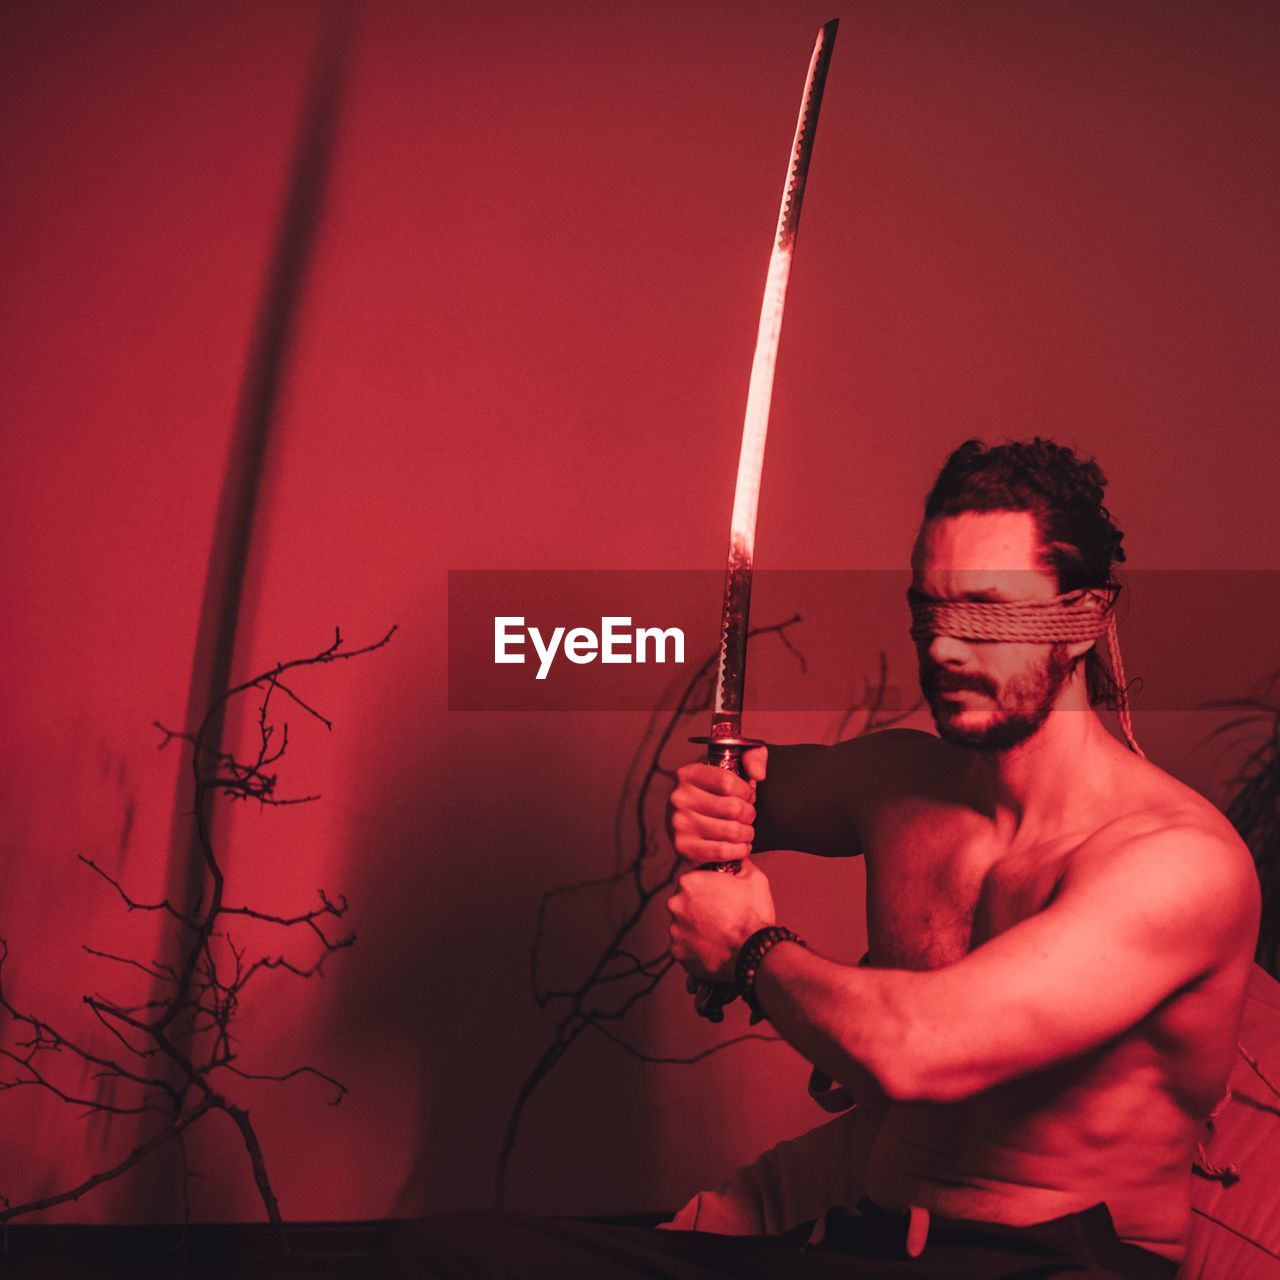 Shirtless man with blindfolds holding sword in illuminated room